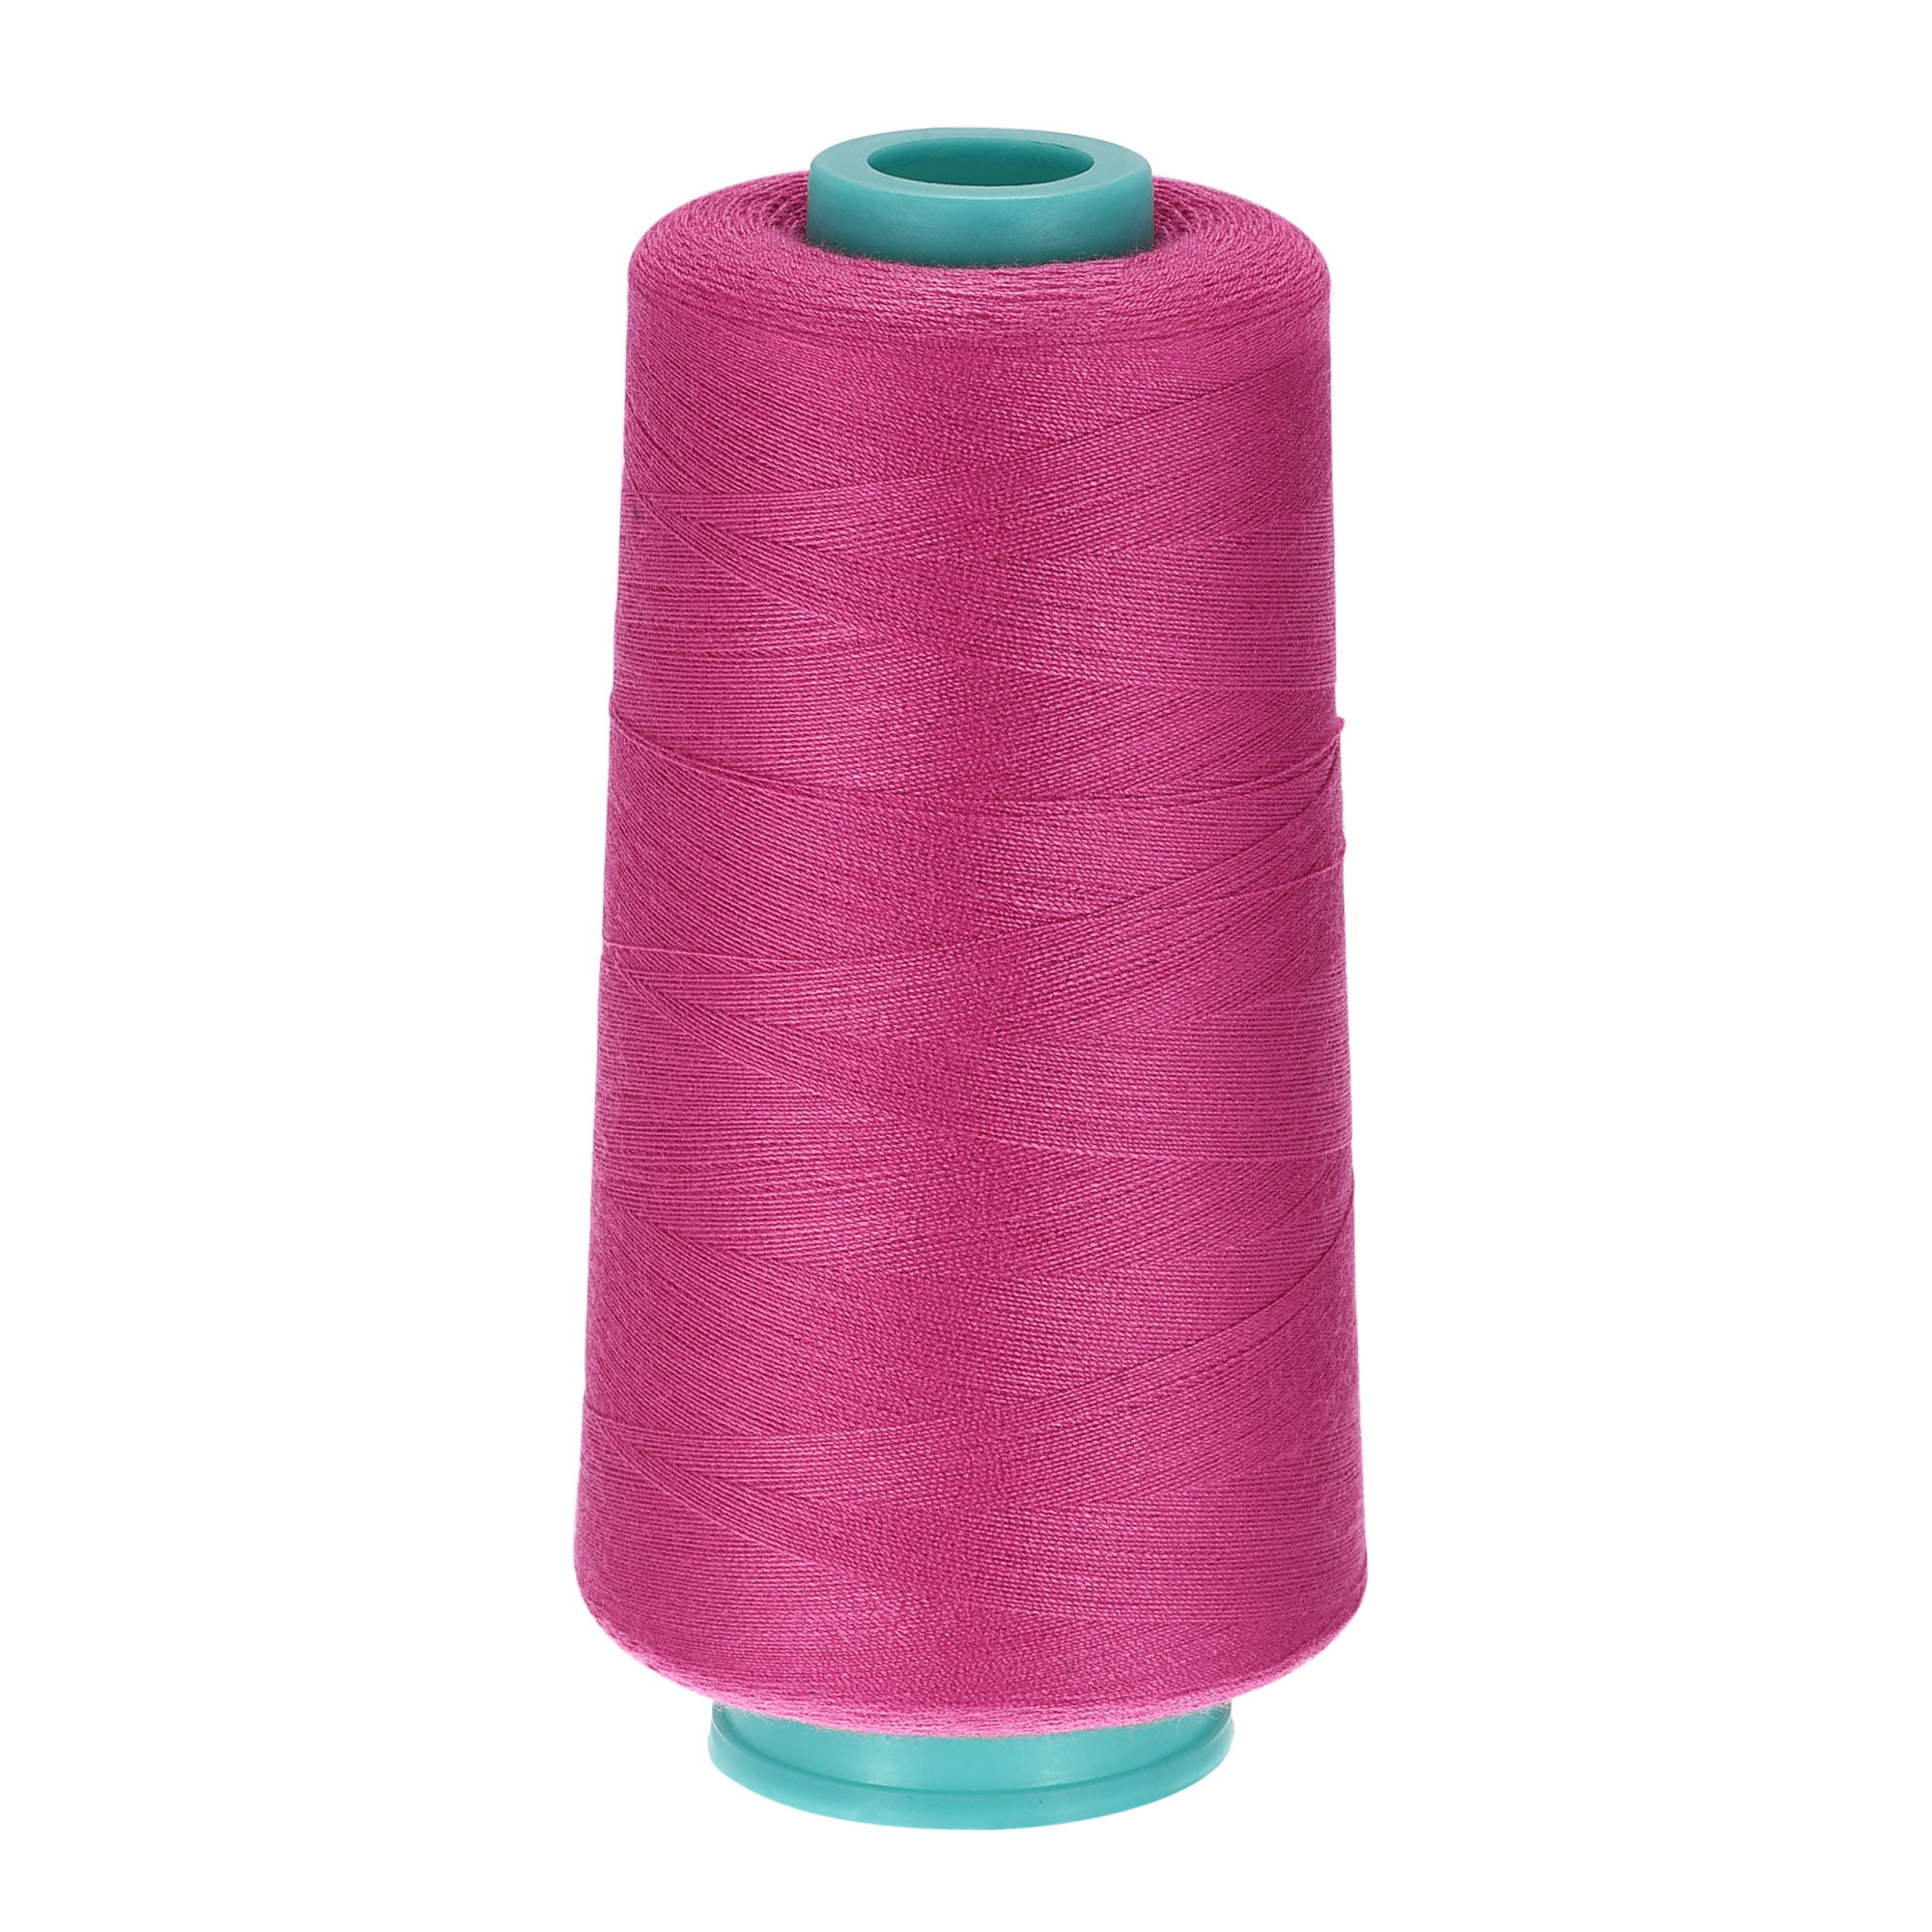  AK Trading 4-Pack Rose Pink All Purpose Sewing Thread